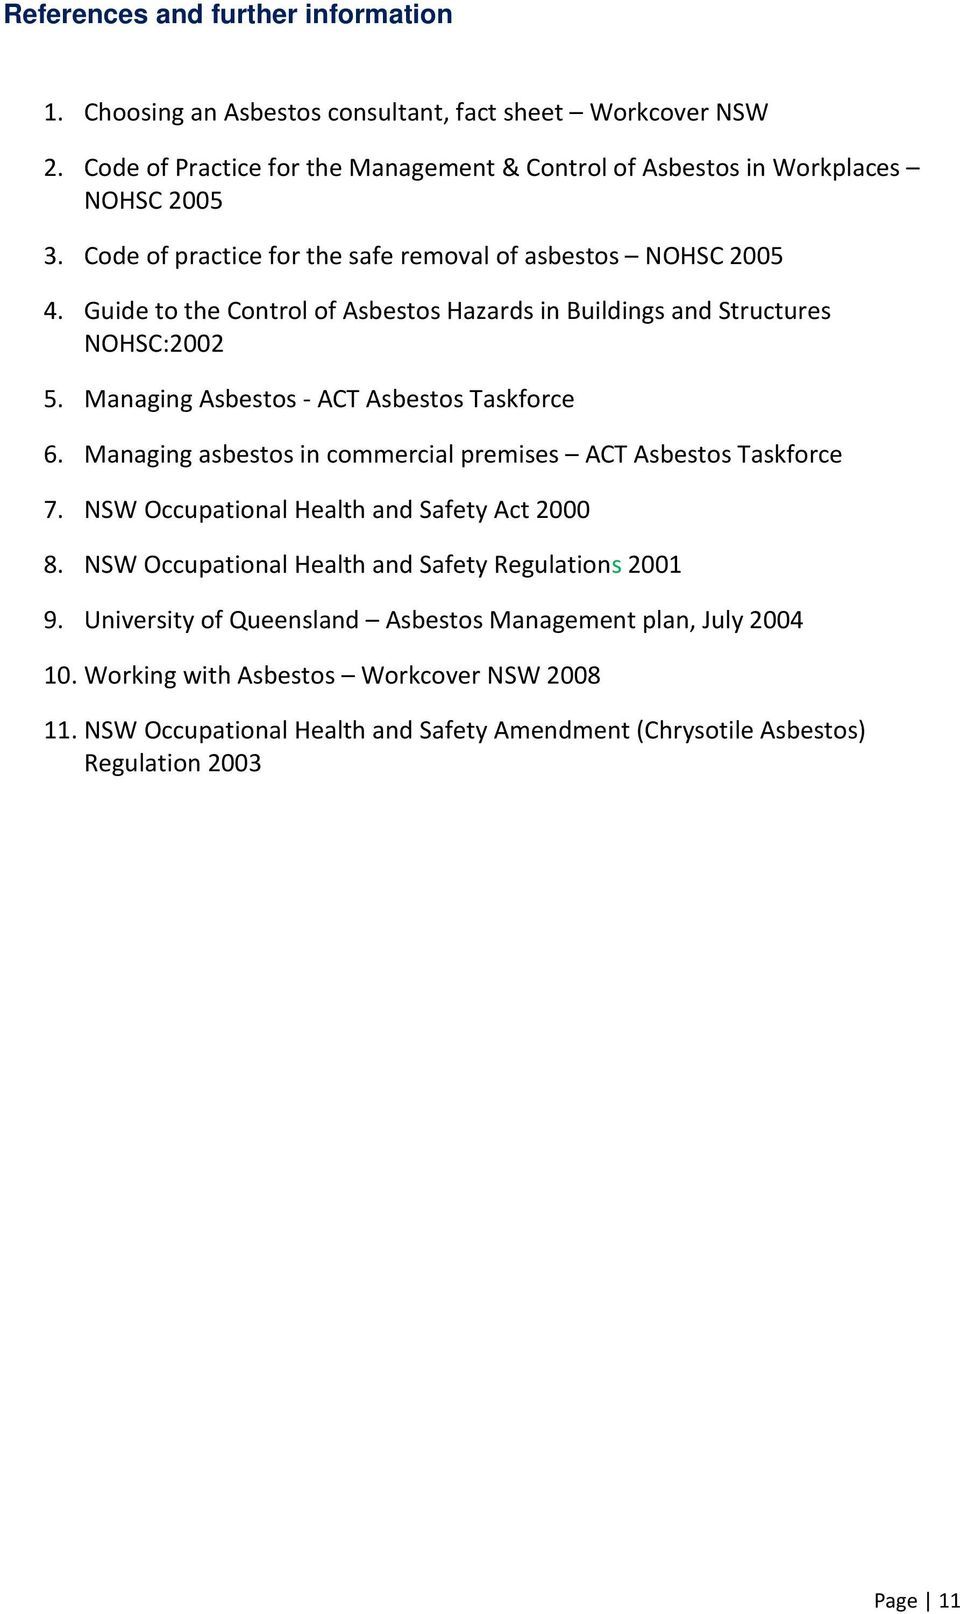 Managing Asbestos - ACT Asbestos Taskforce 6. Managing asbestos in commercial premises ACT Asbestos Taskforce 7. NSW Occupational Health and Safety Act 2000 8.